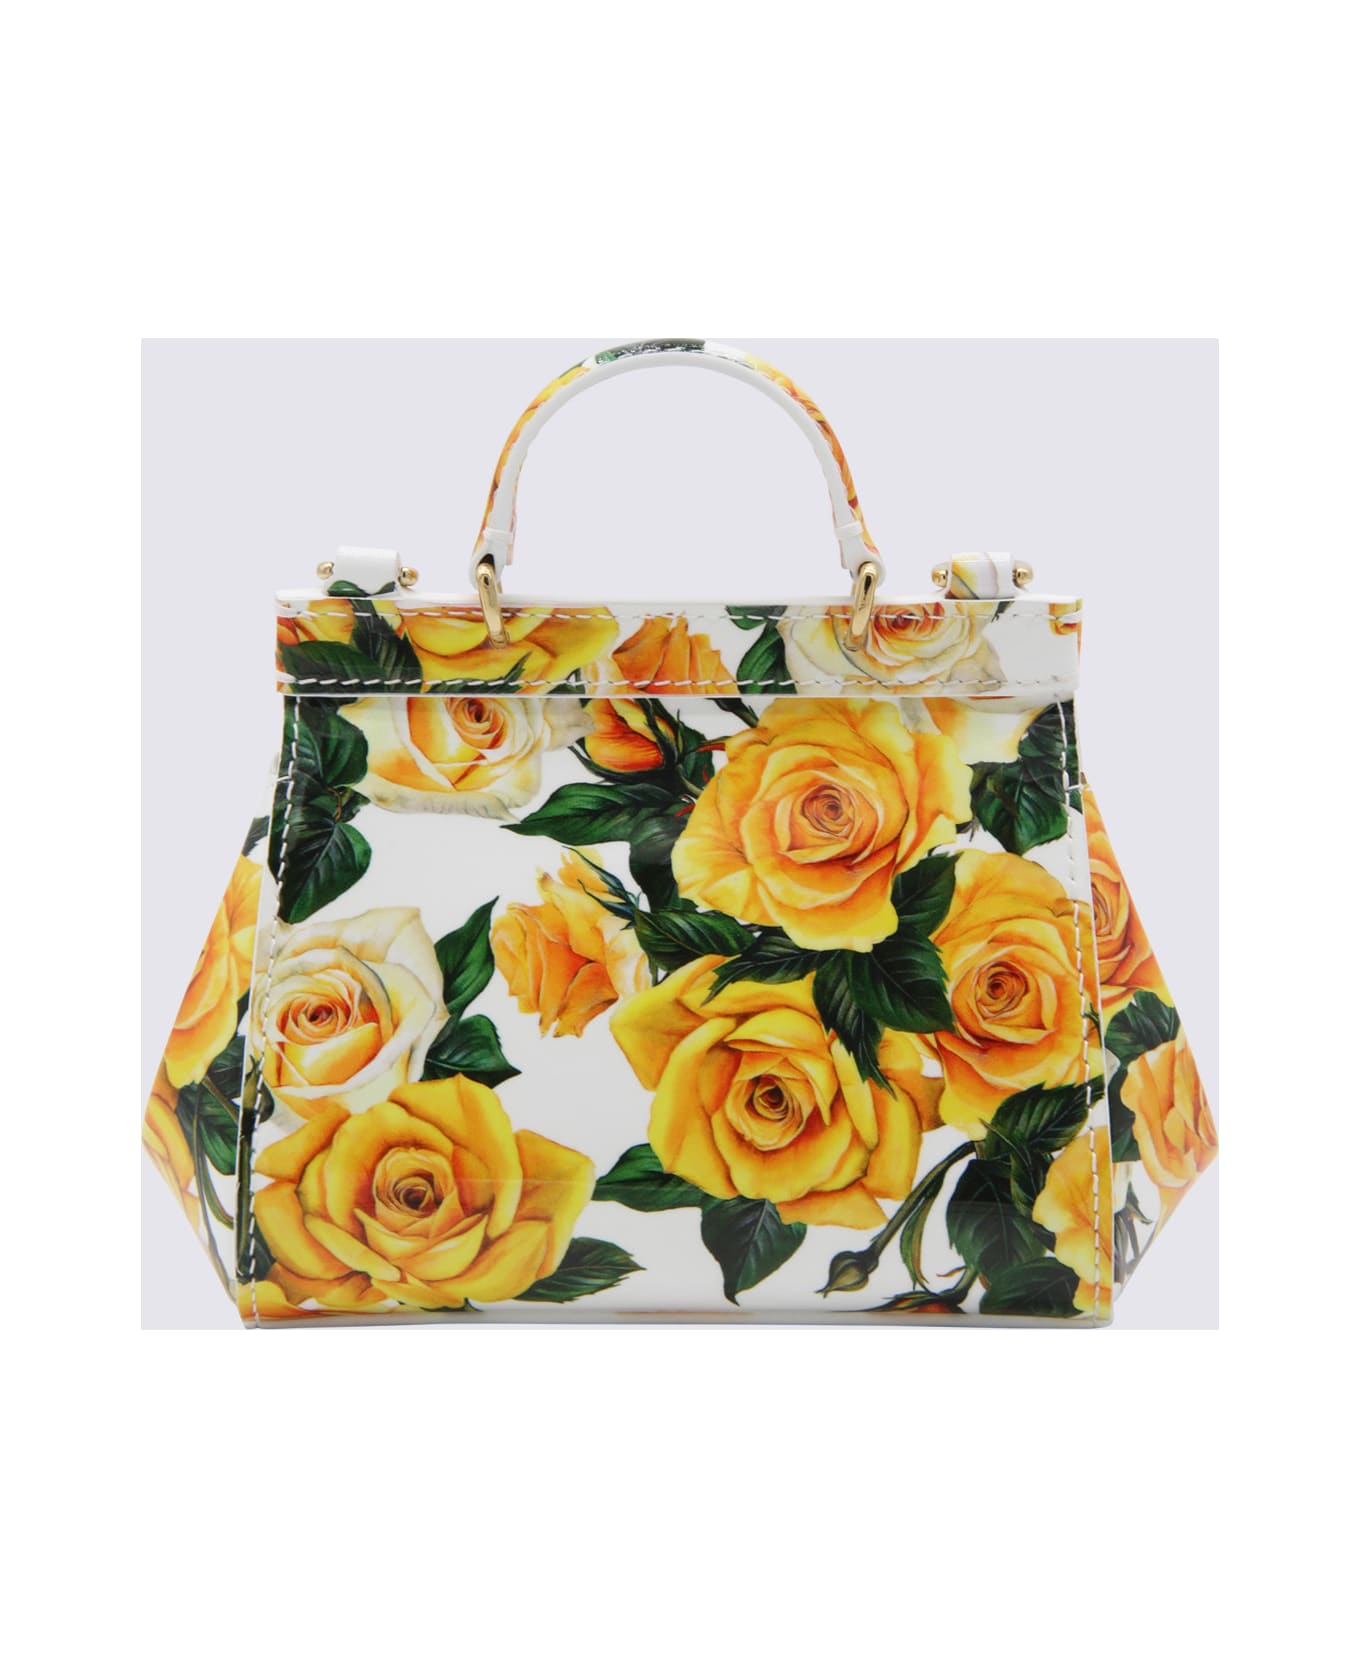 Dolce & Gabbana White And Yellow Leather Sicily Tote Bag - ROSE GIALLE F.DO BIANCO